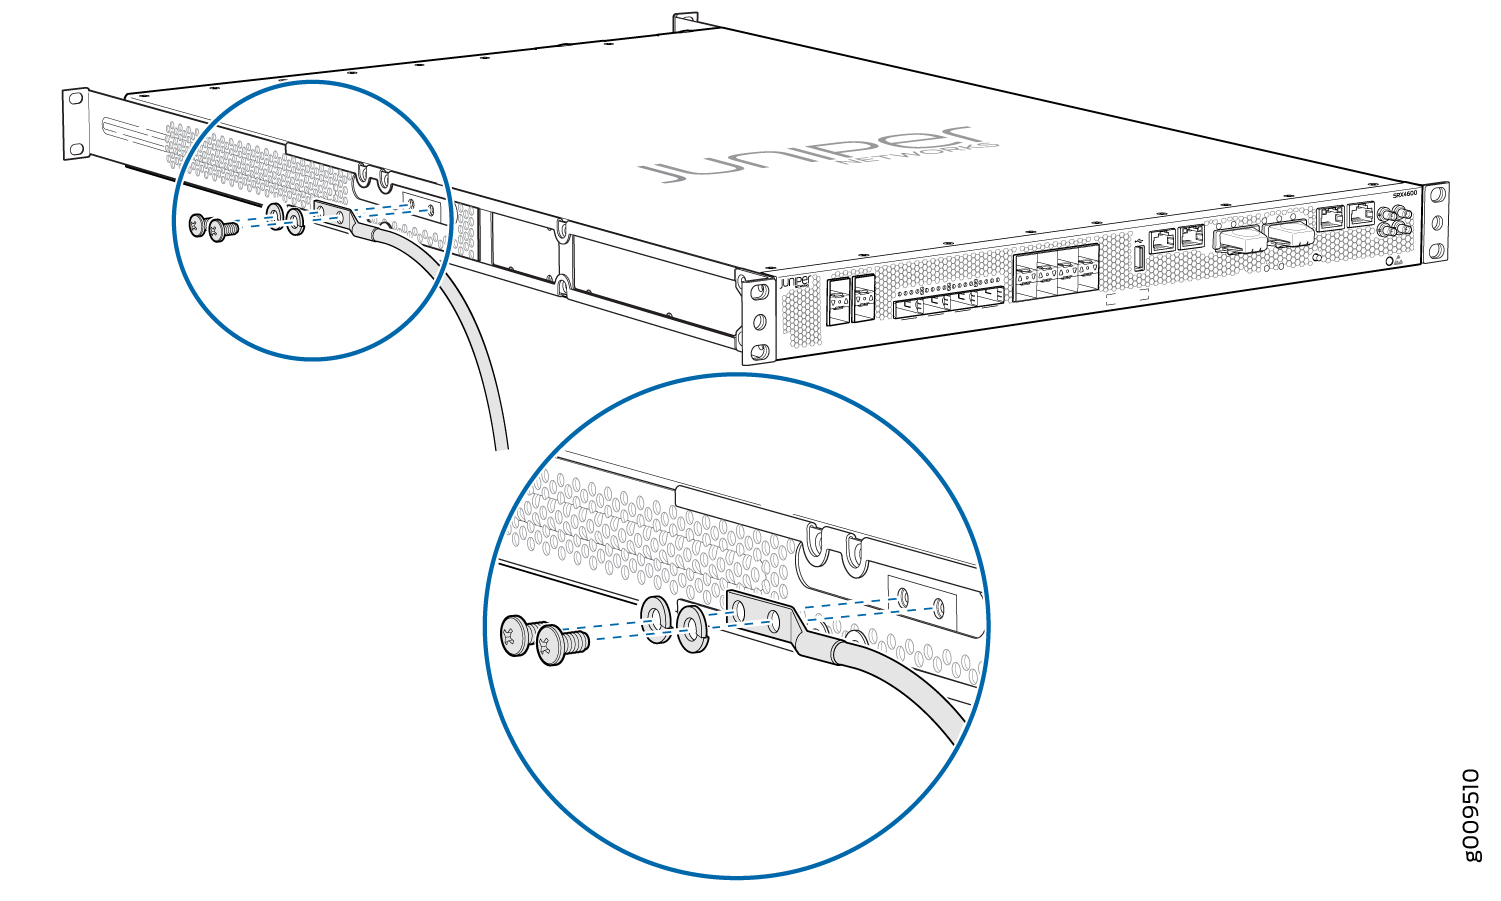 Connecting a Grounding Cable to an SRX4600 Services Gateway